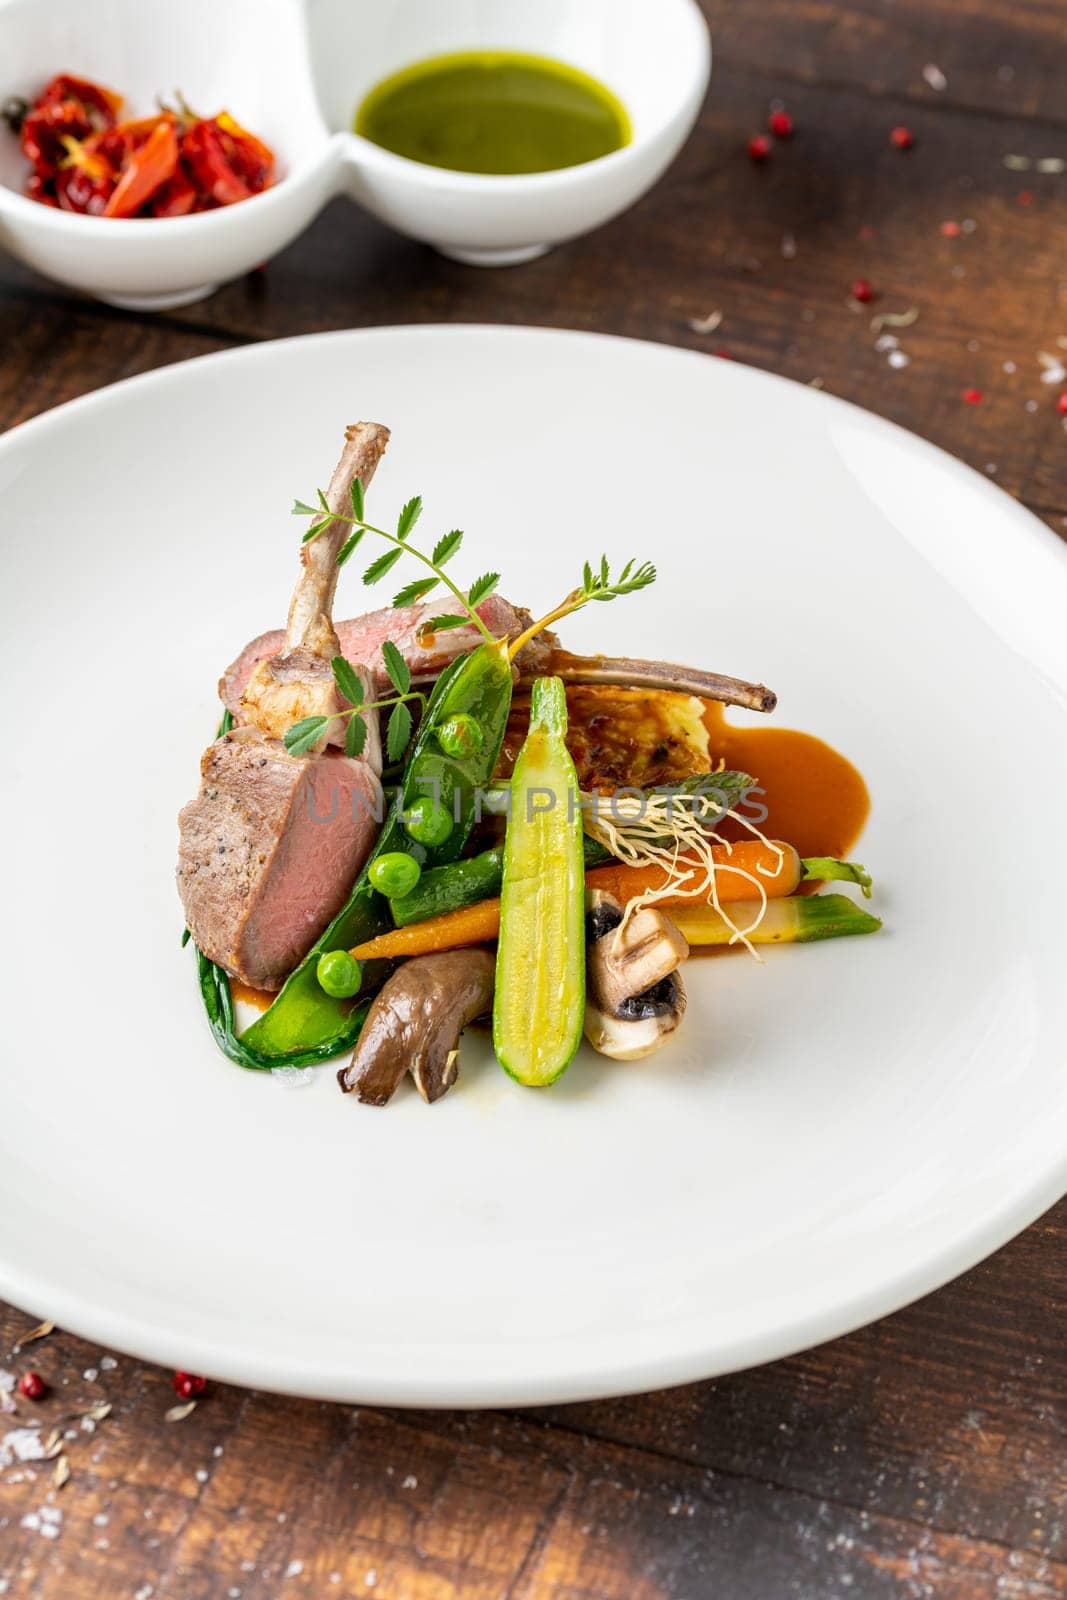 lamb chops with various vegetables at a fine dining restaurant by Sonat